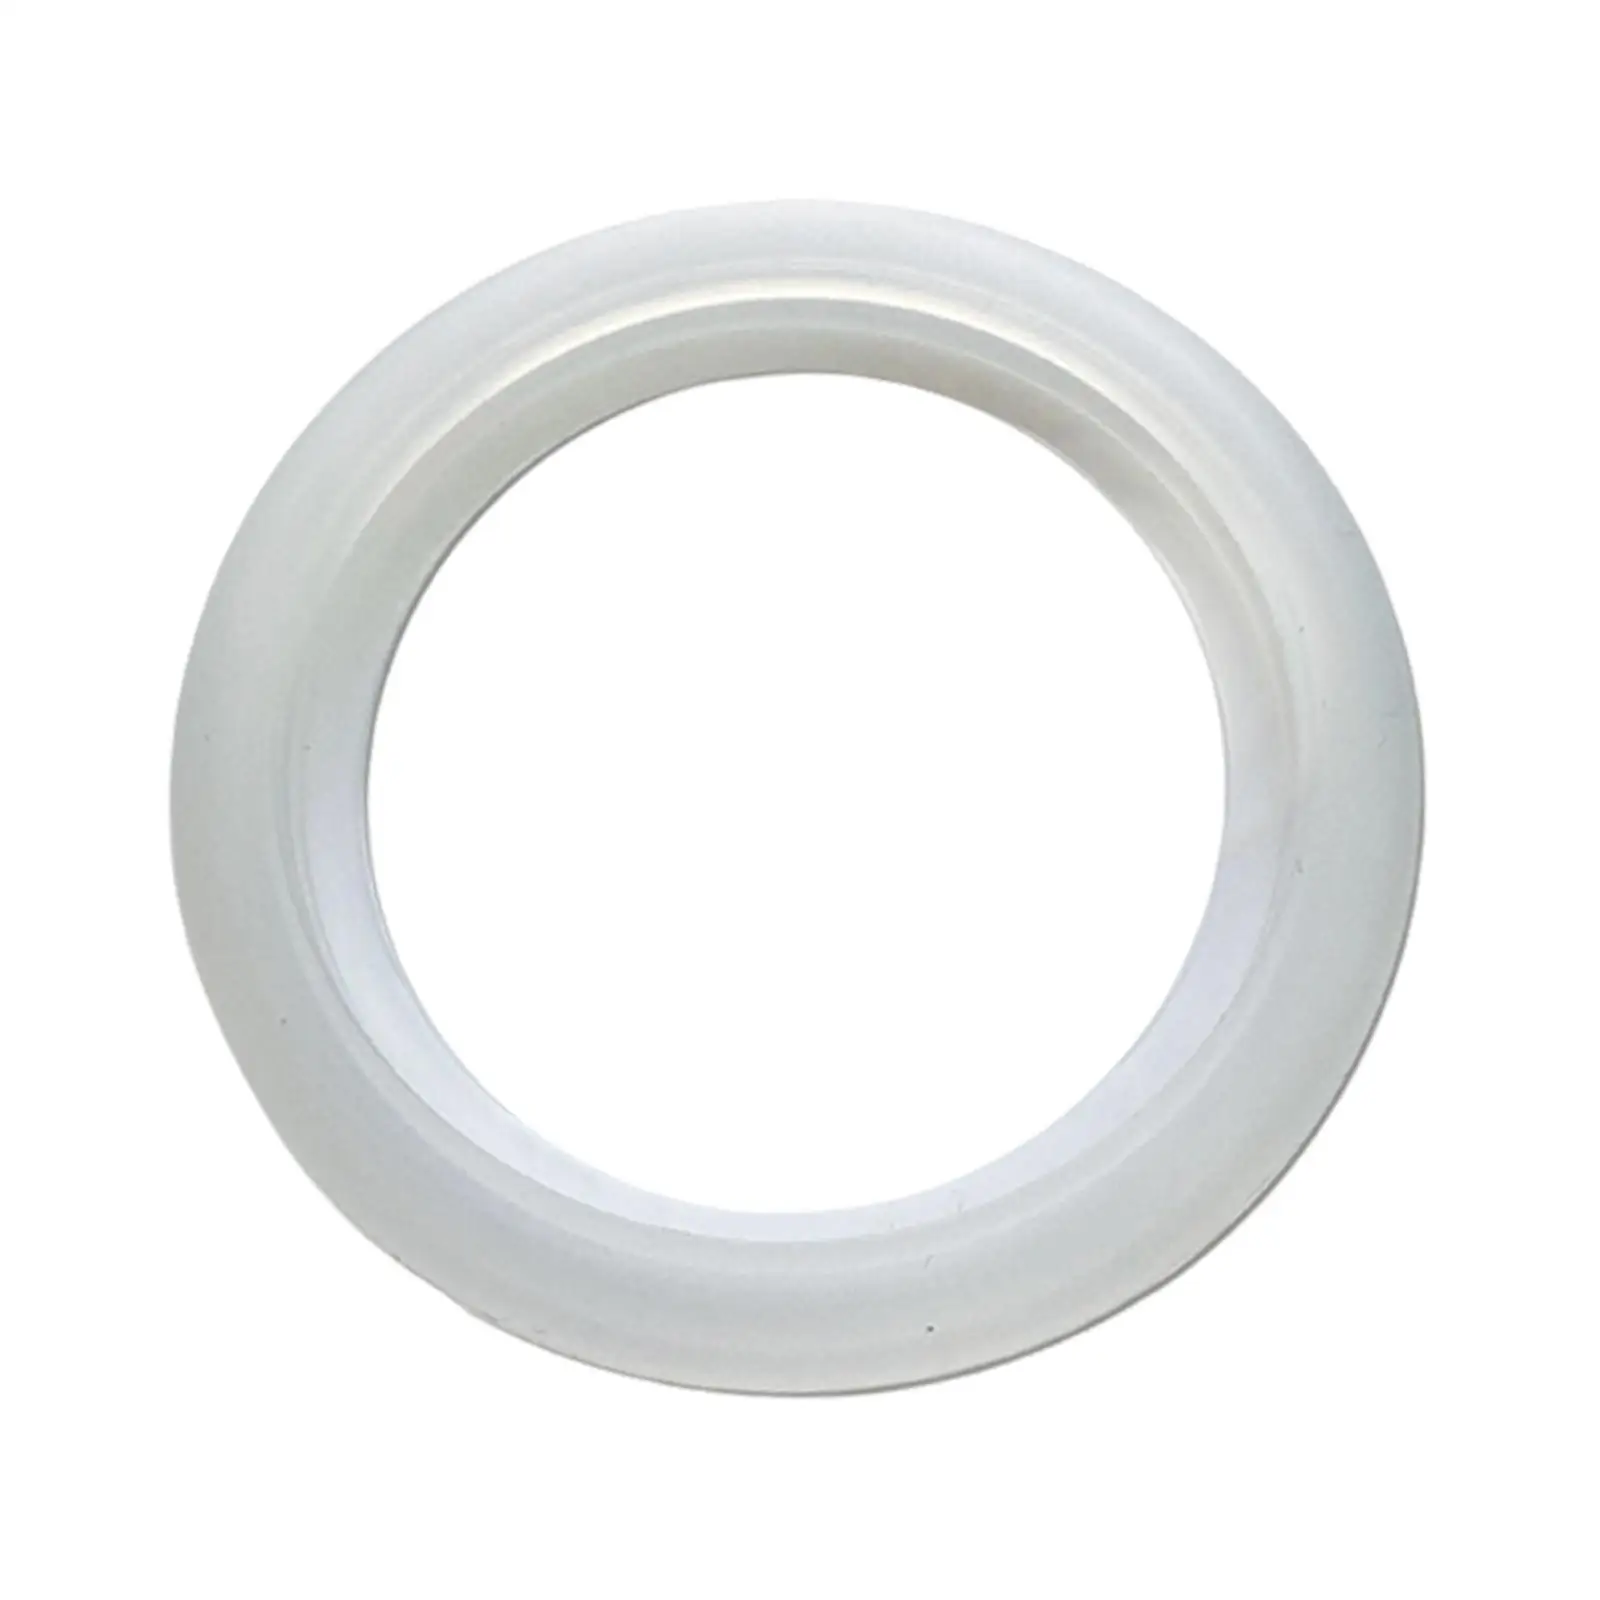 Silicone Steam Rings Easy to Clean Replacement Coffee Machine Rings Silicone Group Gasket for Bes230 800ES Coffee Maker Machine